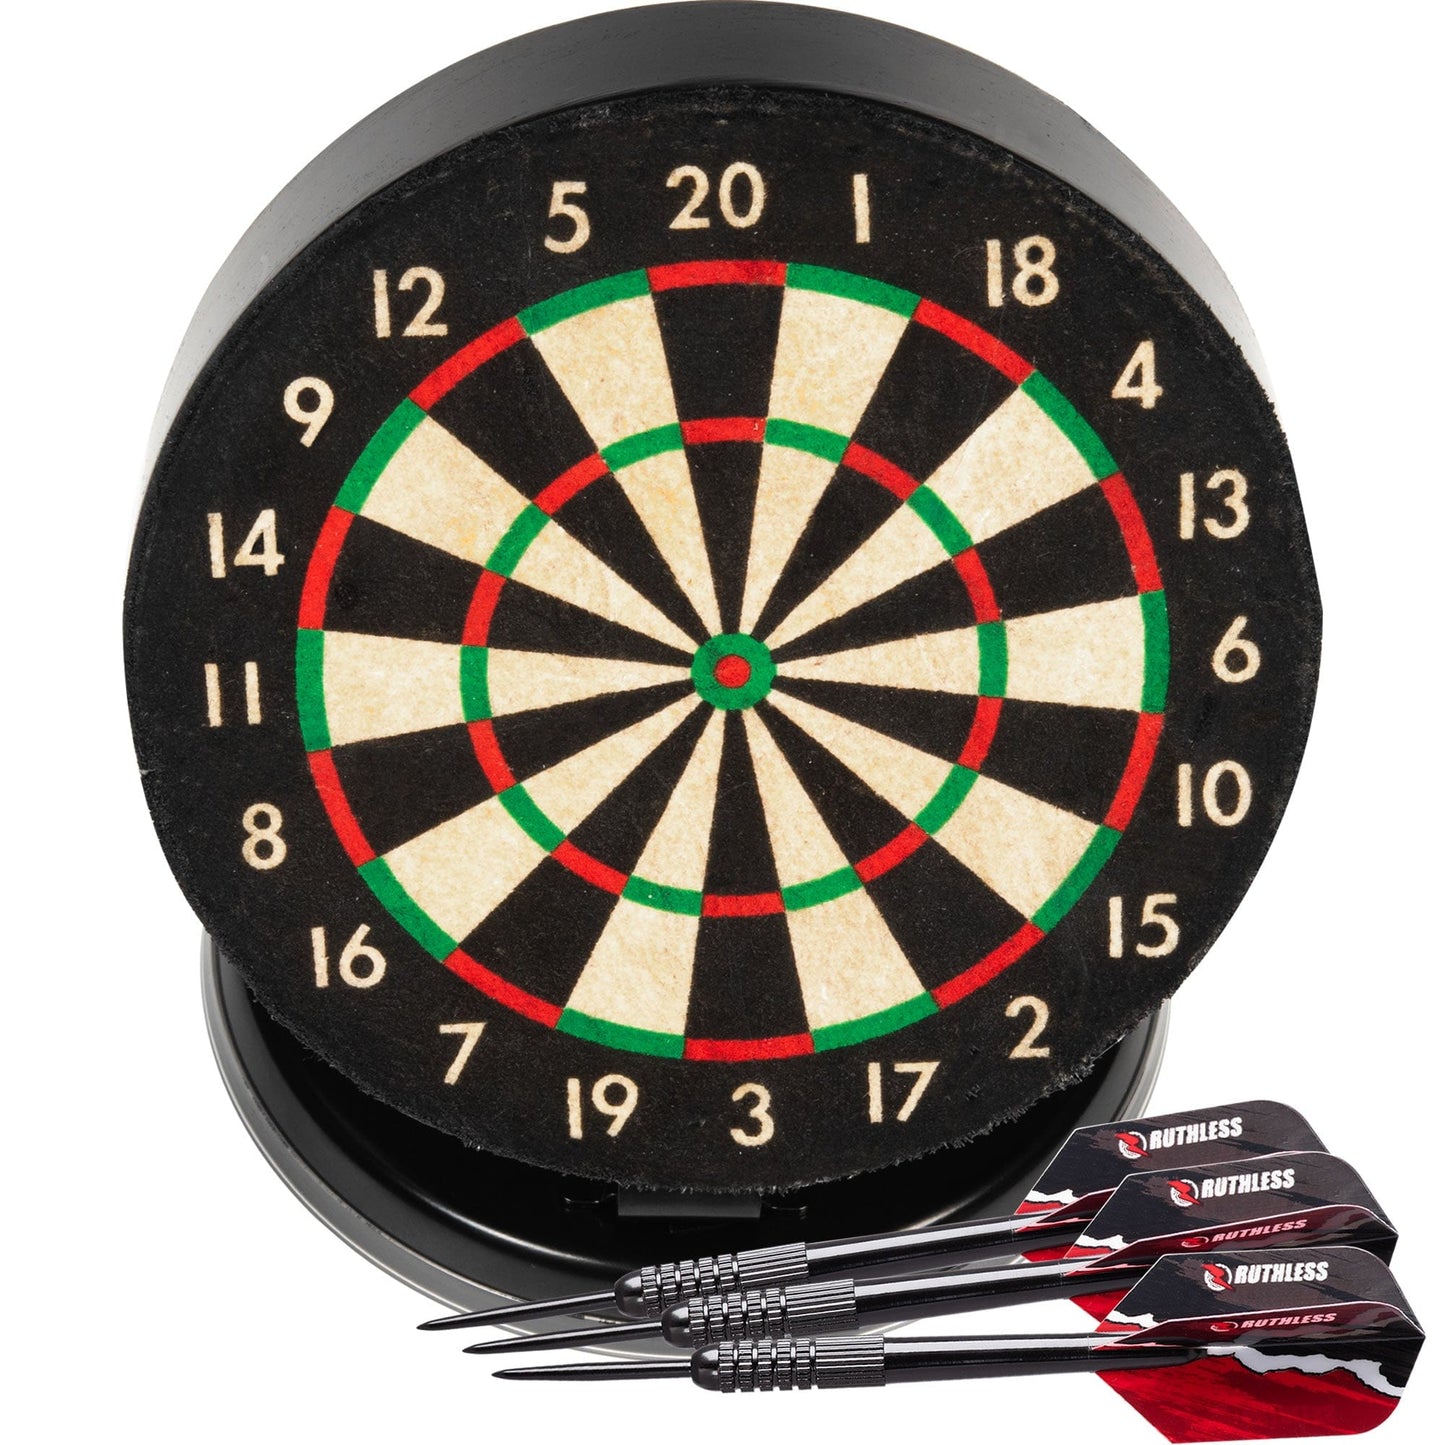 Ruthless Mini Desktop Dartboard - 6 Inch - Desk Version or Wall Mountable - Complete with Darts